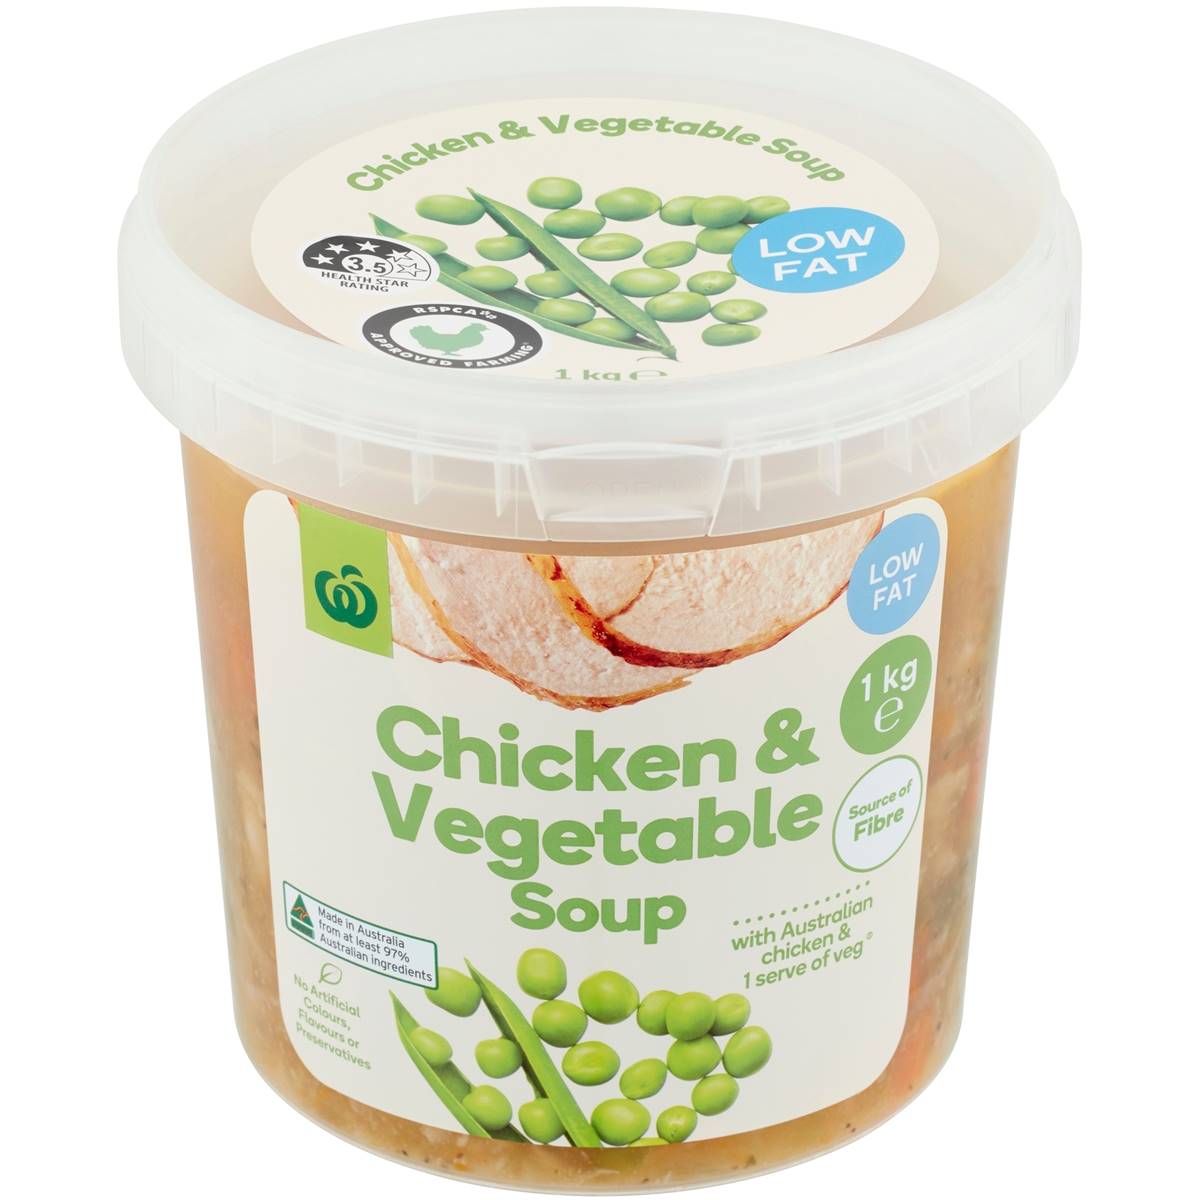 Woolworths Chicken & Vegetable Soup 